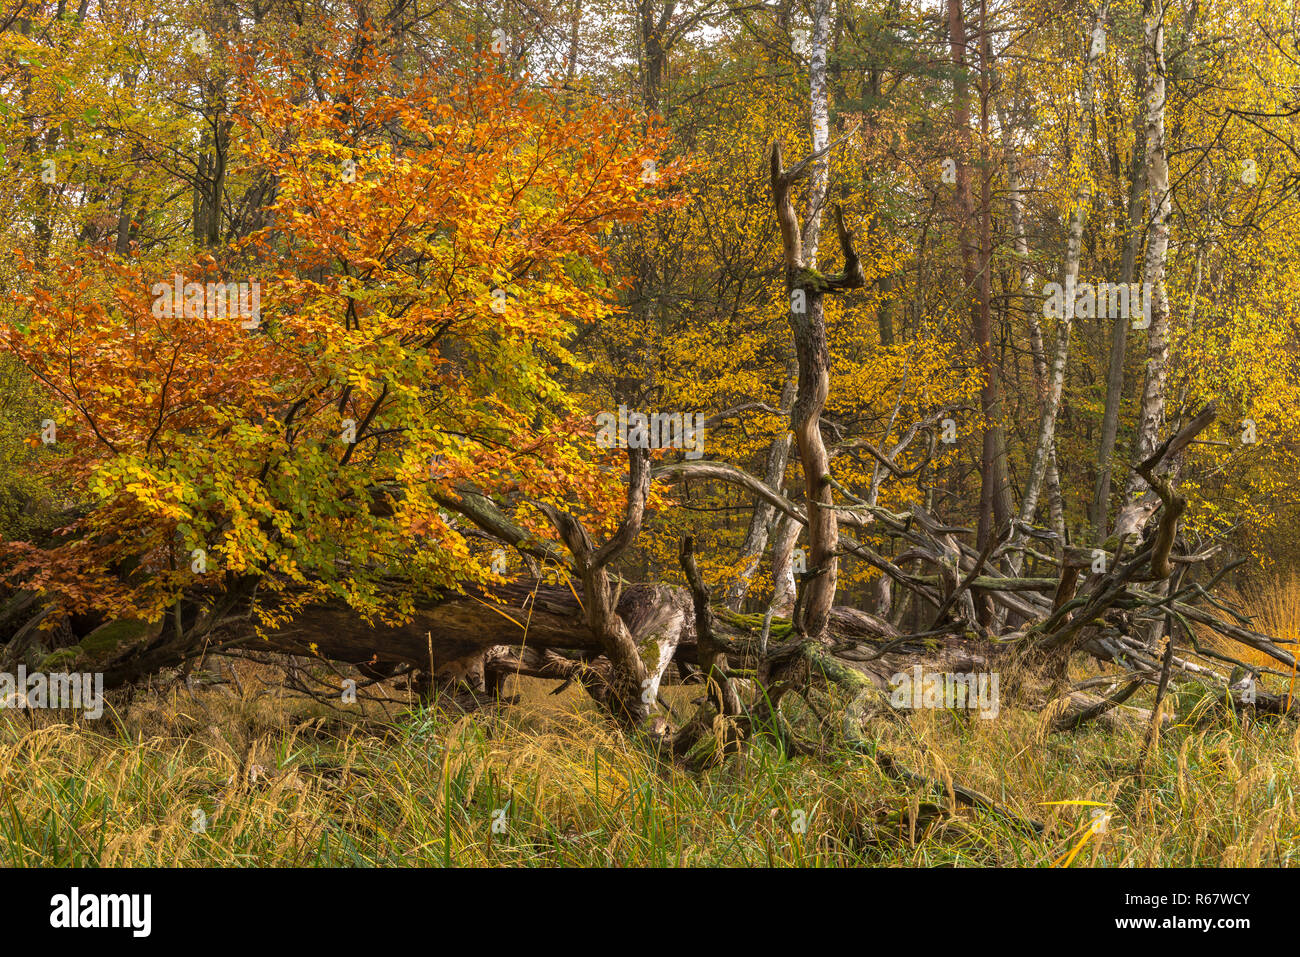 Autumn alluvial forest with dead wood, old fallen pine trees, Mönchbruch forest, Mönchbruch nature reserve Stock Photo